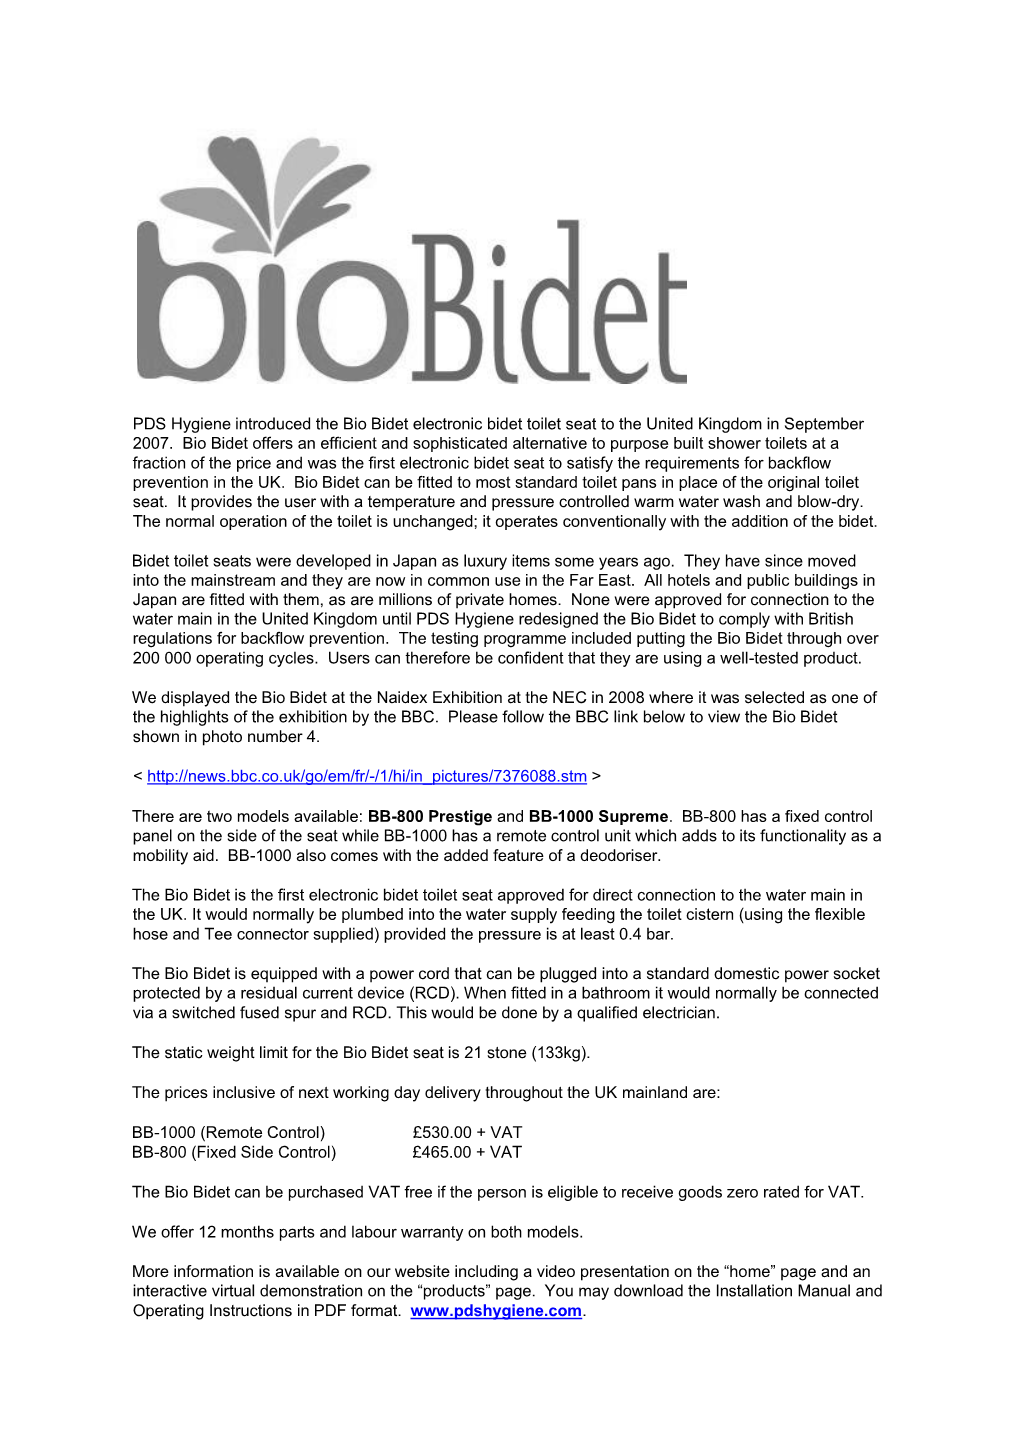 PDS Hygiene Introduced the Bio Bidet Electronic Bidet Toilet Seat to the United Kingdom in September 2007